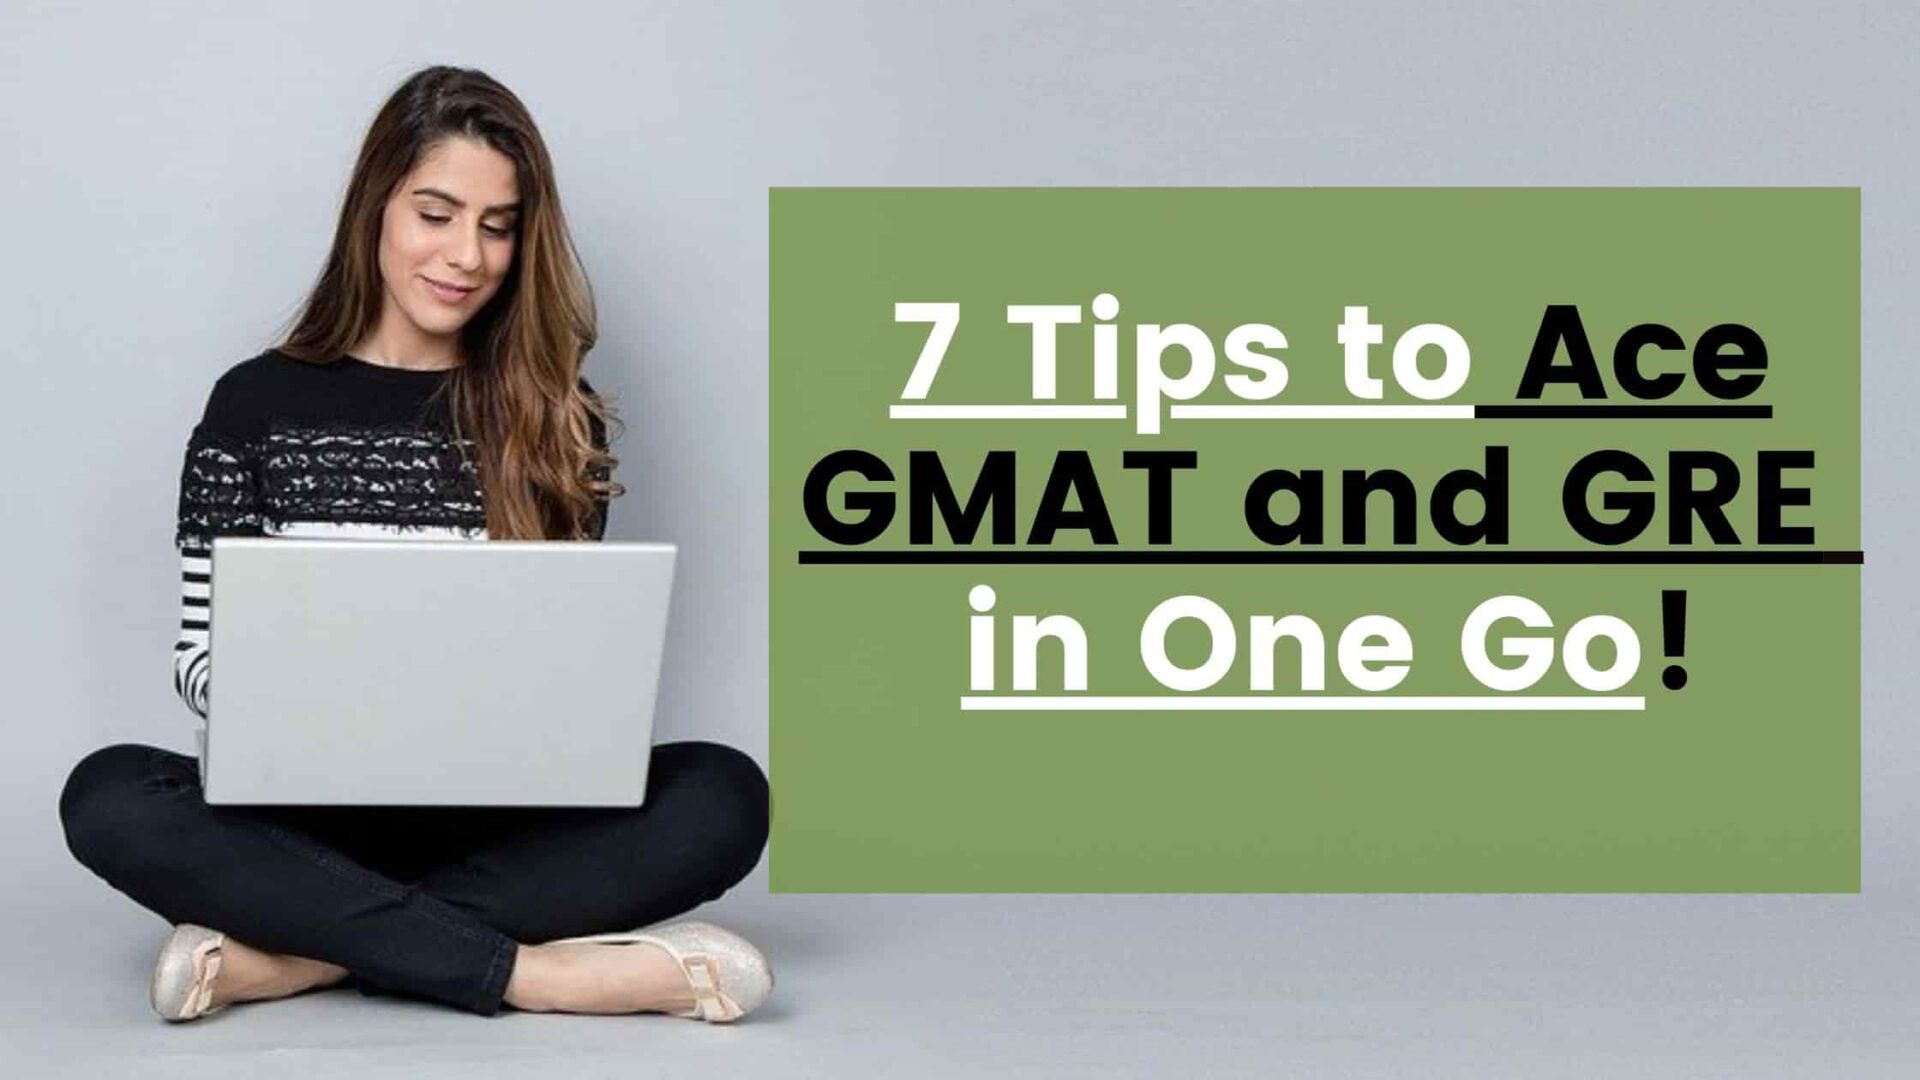 These 7 tips will help you ace GMAT and GRE in one go